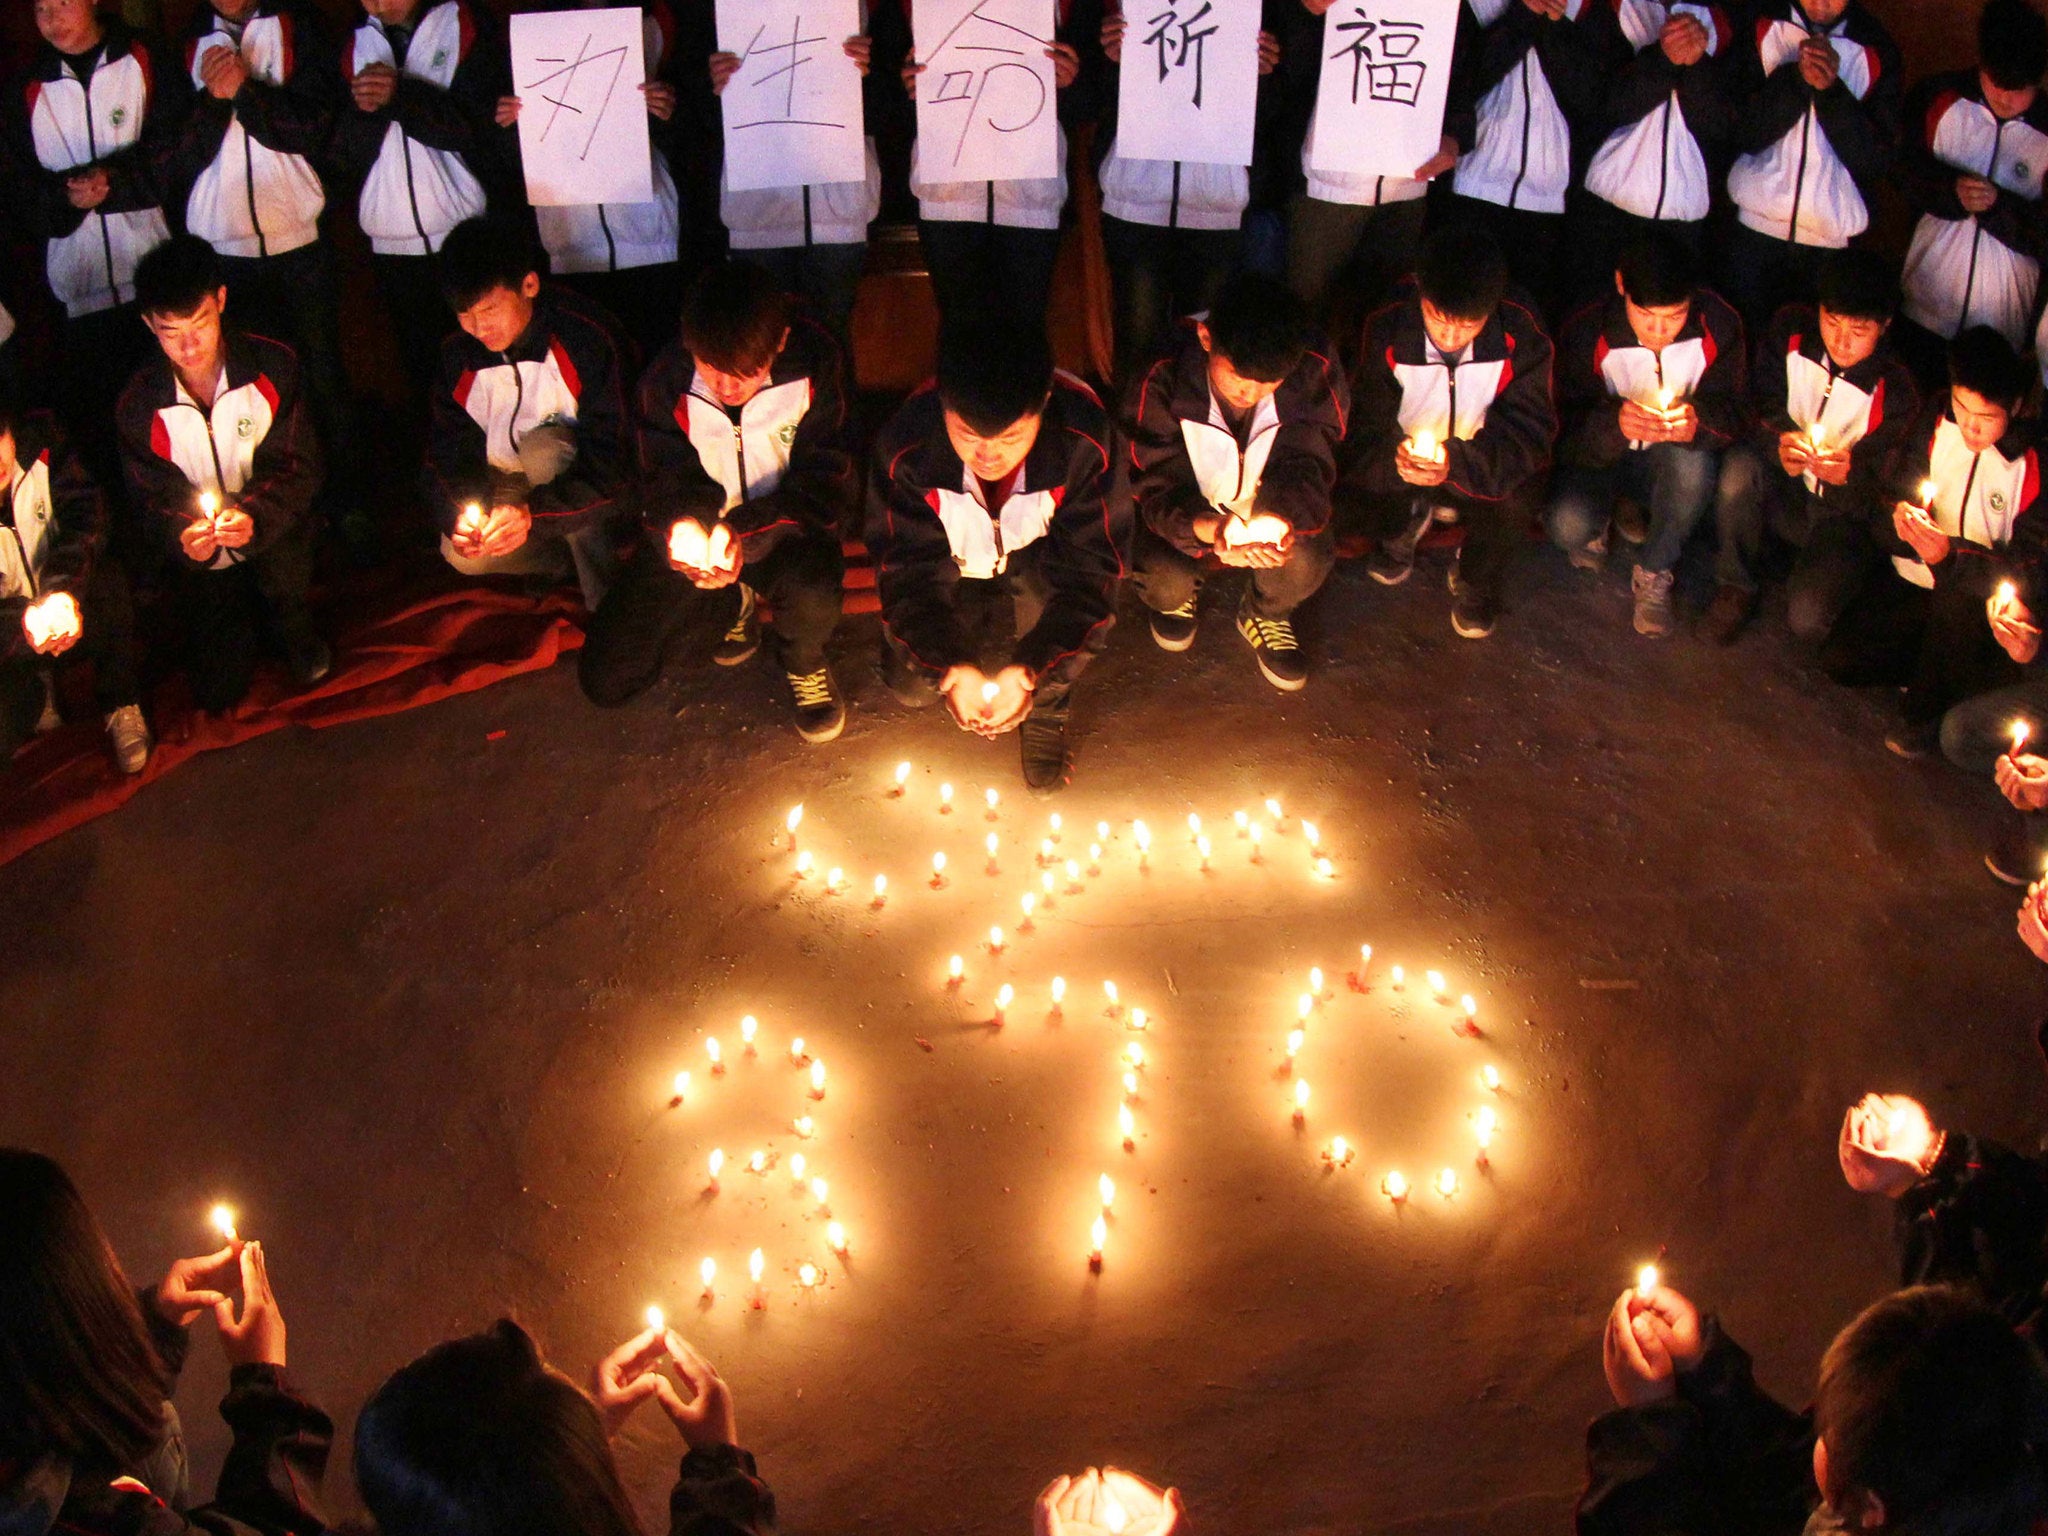 High school students hold candles during a vigil for passengers of the missing Malaysia Airline flight MH370 in China